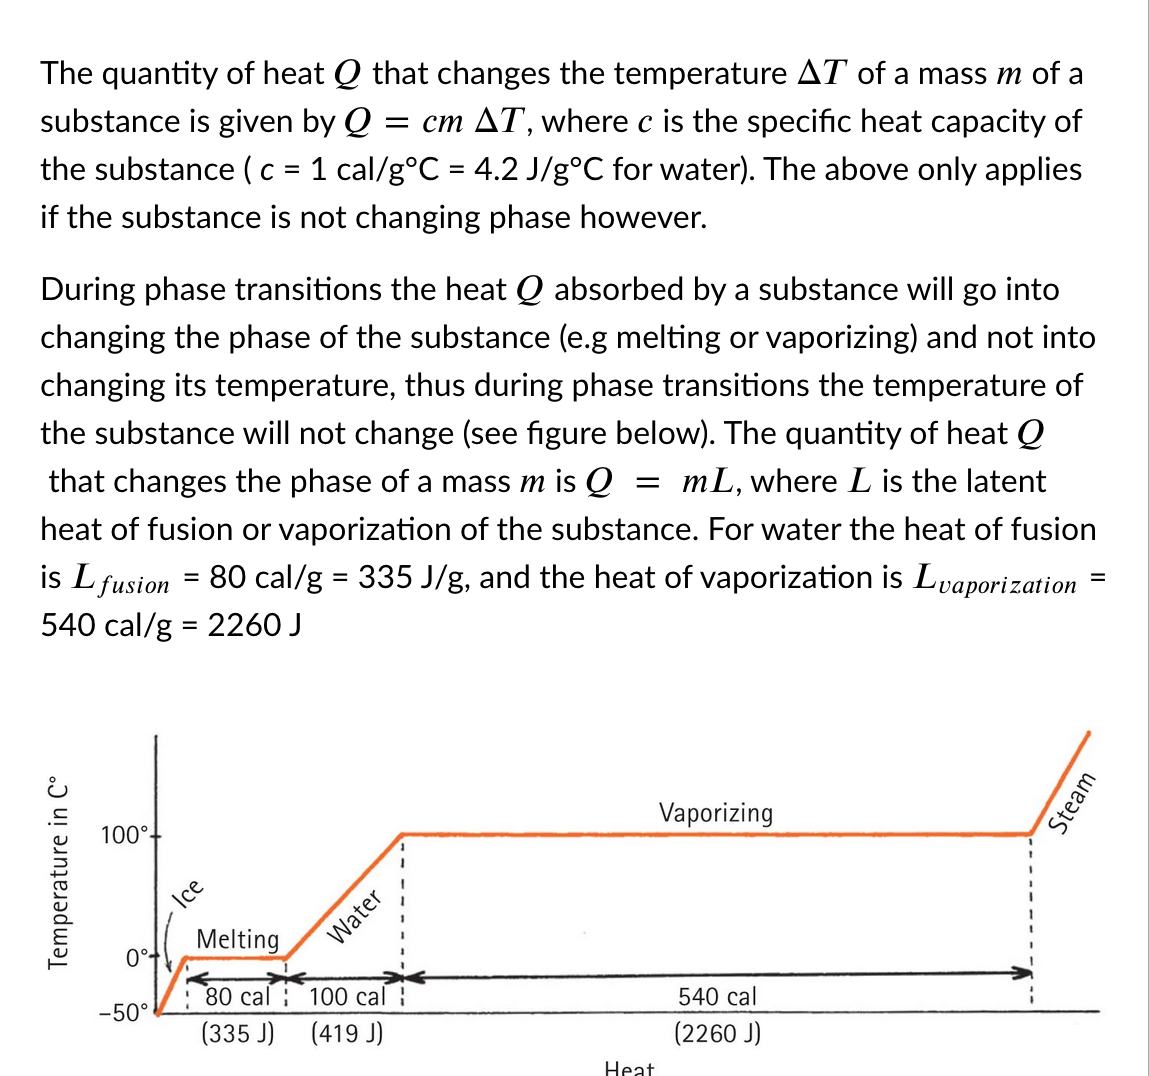 The quantity of heat Q that changes the temperature AT of a mass m of a
substance is given by Q
= cm AT, where c is the specific heat capacity of
the substance (c = 1 cal/g°C = 4.2 J/g°C for water). The above only applies
if the substance is not changing phase however.
During phase transitions the heat Q absorbed by a substance will go into
changing the phase of the substance (e.g melting or vaporizing) and not into
changing its temperature, thus during phase transitions the temperature of
the substance will not change (see figure below). The quantity of heat Q
that changes the phase of a mass m is Q
mL, where L is the latent
heat of fusion or vaporization of the substance. For water the heat of fusion
80 cal/g = 335 J/g, and the heat of vaporization is Lvaporization
is L fusion
540 cal/g = 2260 J
100°-
Vaporizing
Ice
Melting
0°-
80 cal ; 100 cal :
-50°
540 cal
(335 J) (419 J)
(2260 J)
Heat
Temperature in C°
Water
Steam
